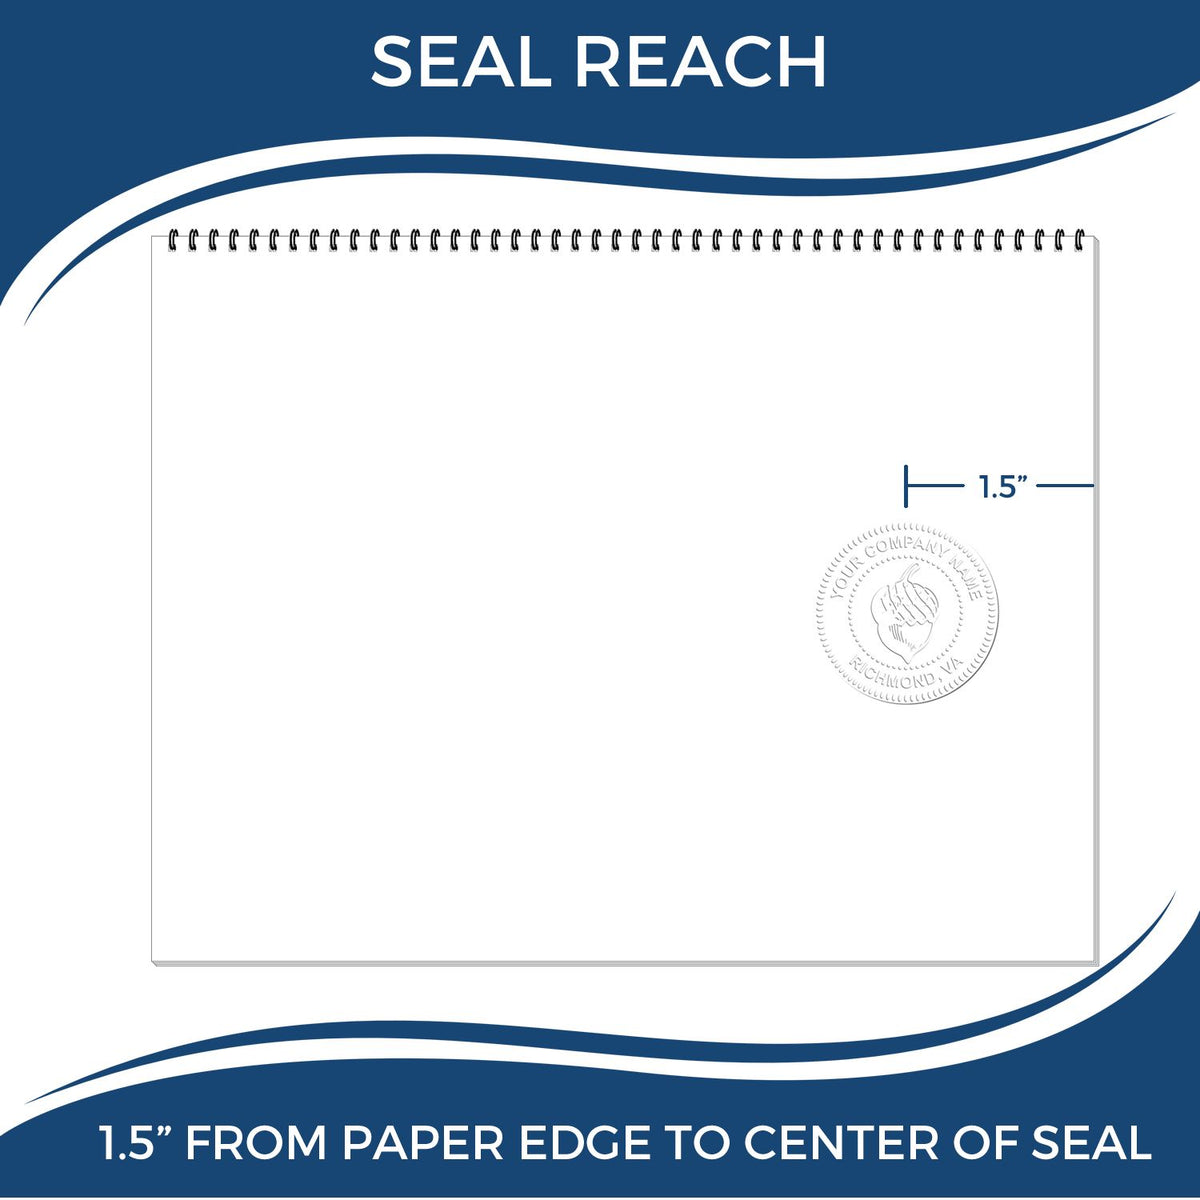 An infographic showing the seal reach which is represented by a ruler and a miniature seal image of the Handheld Kentucky Architect Seal Embosser